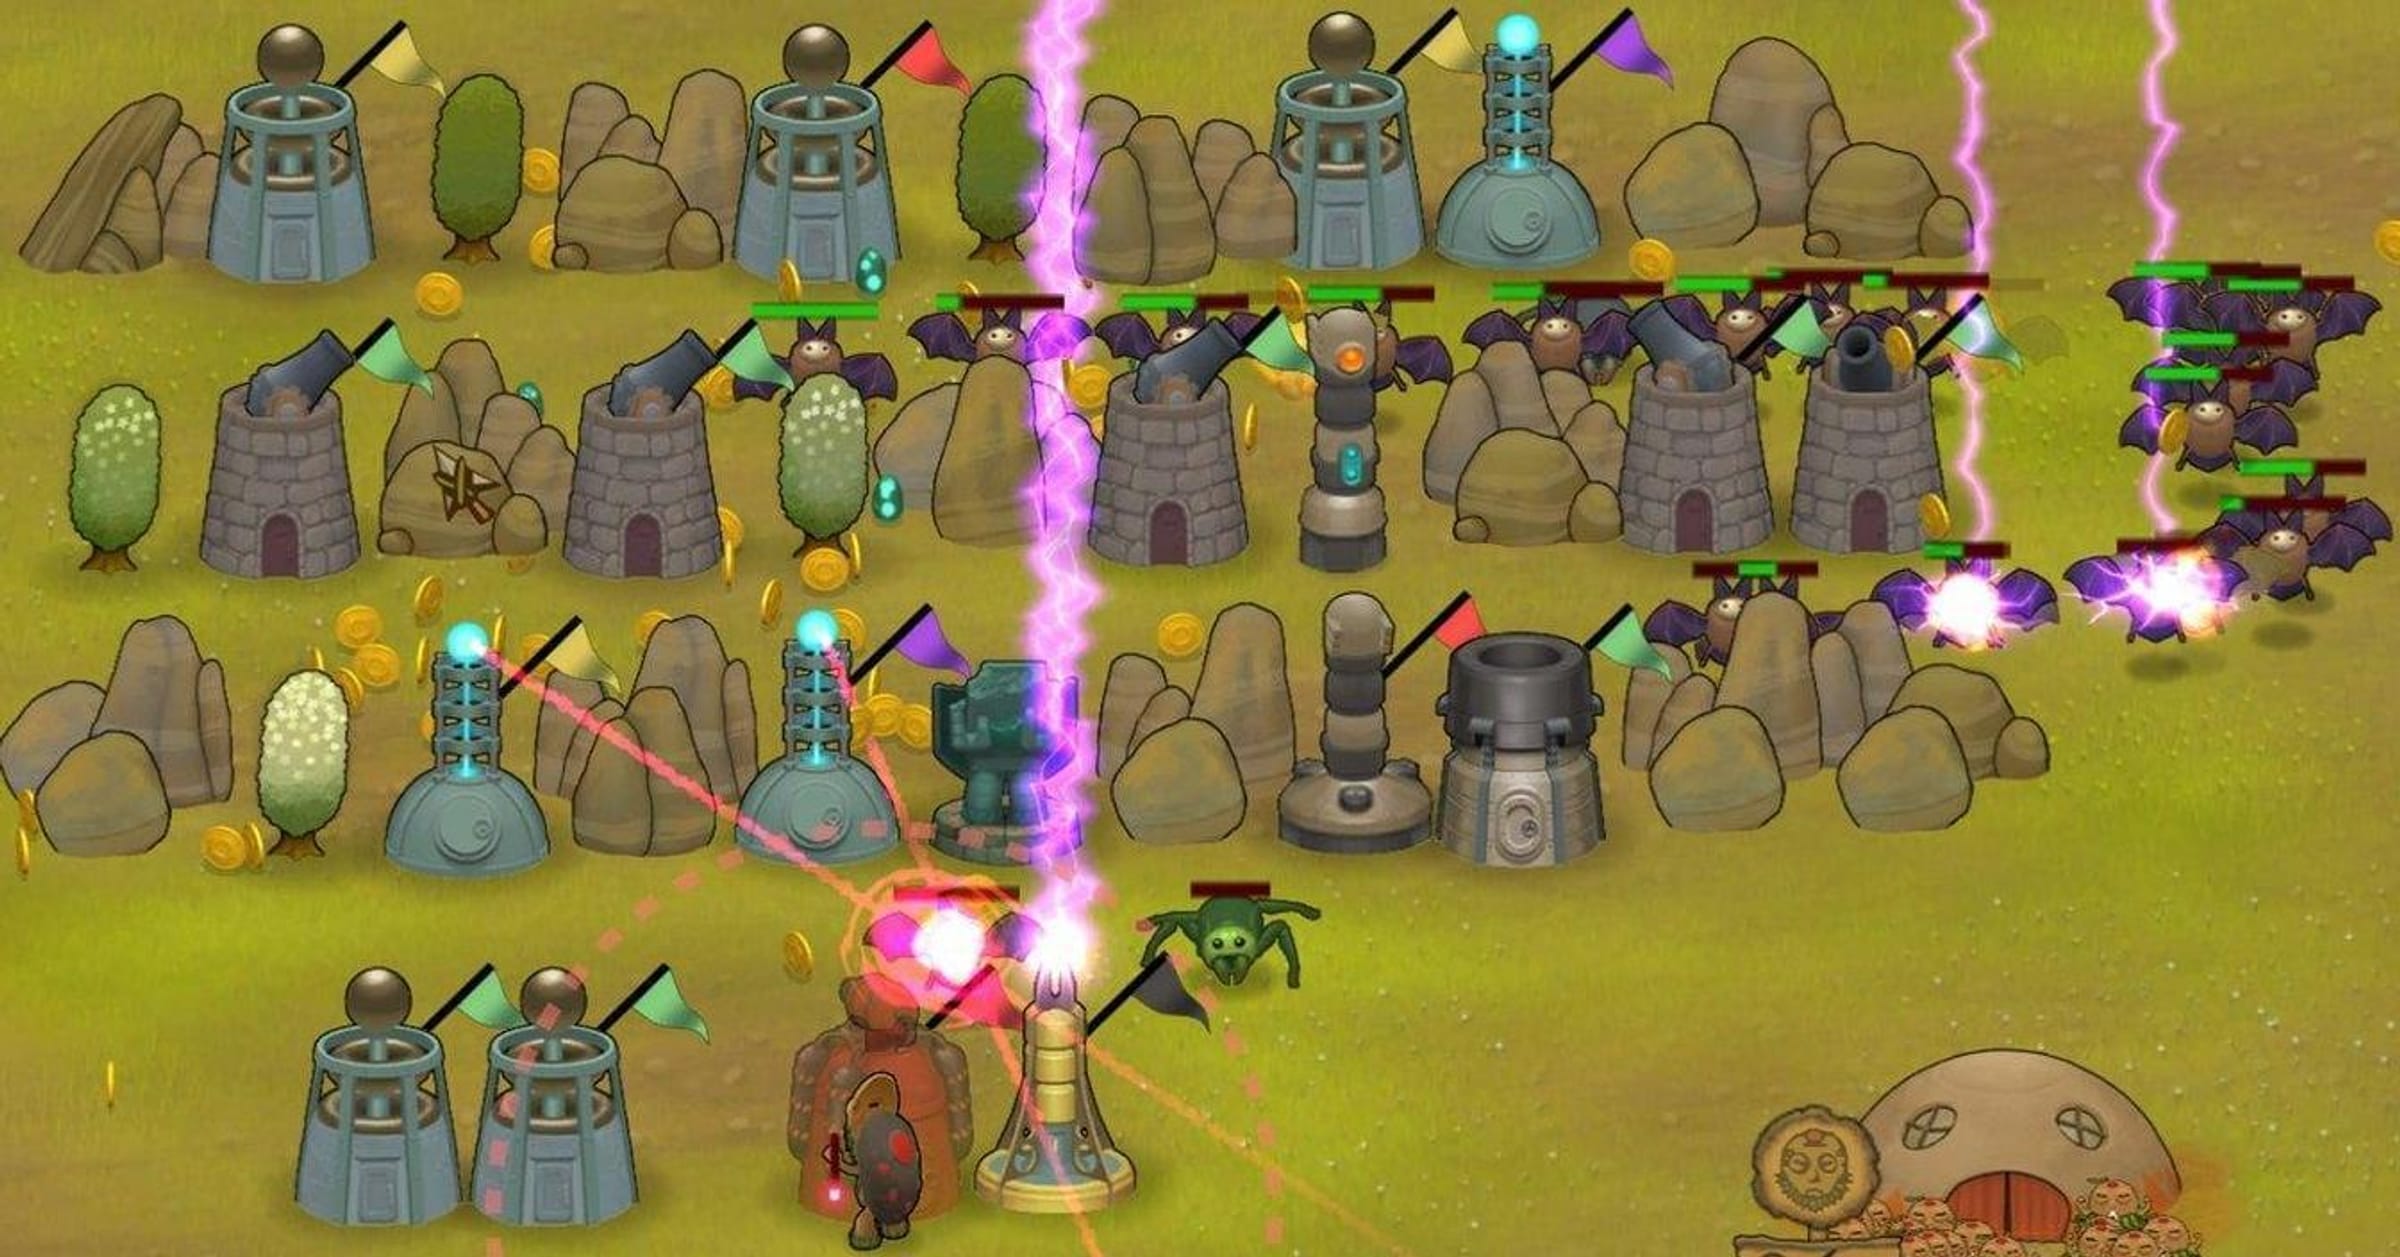 Fieldrunners' Delivers a Very Polished Tower Defense Game